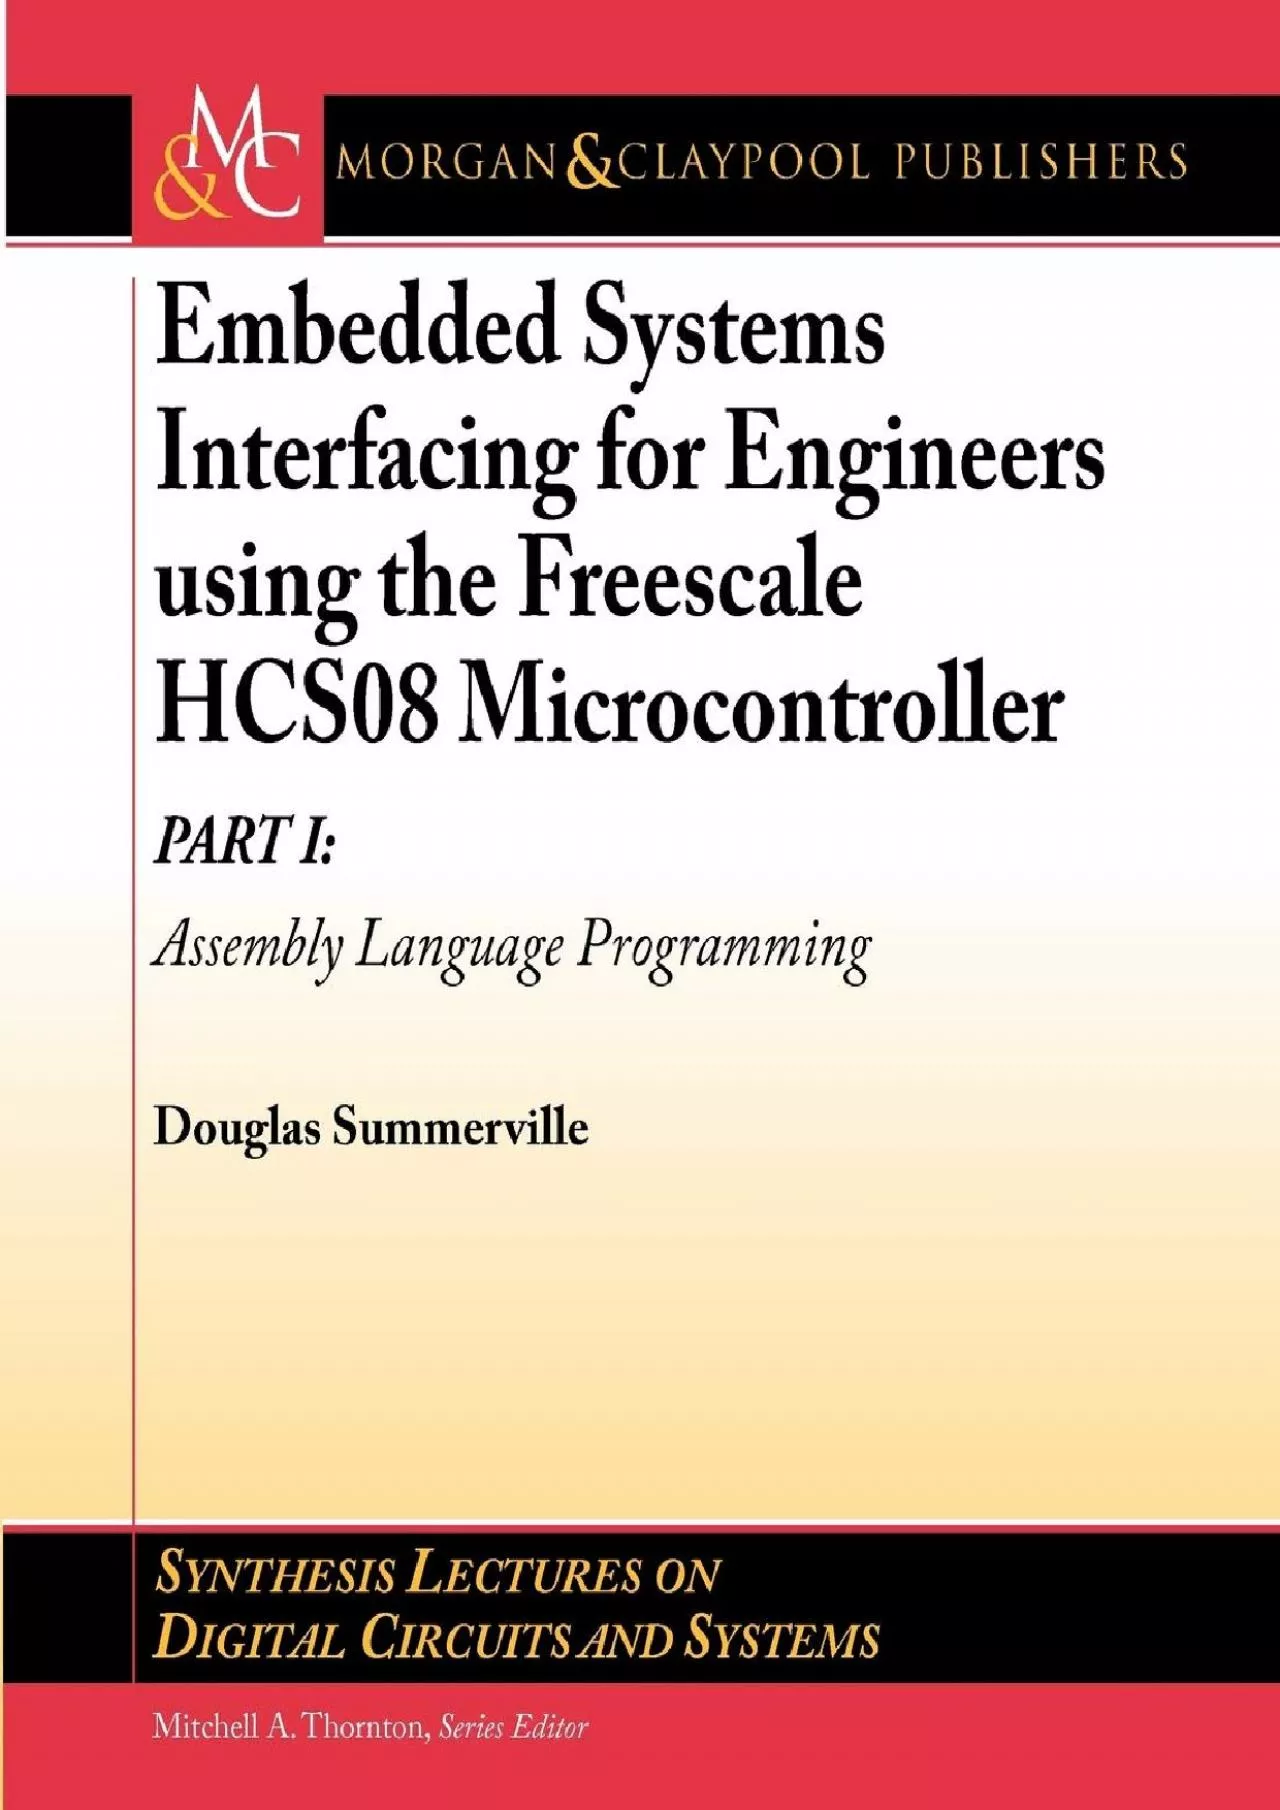 [READING BOOK]-Embedded Systems Interfacing for Engineers using the Freescale HCS08 Microcontroller